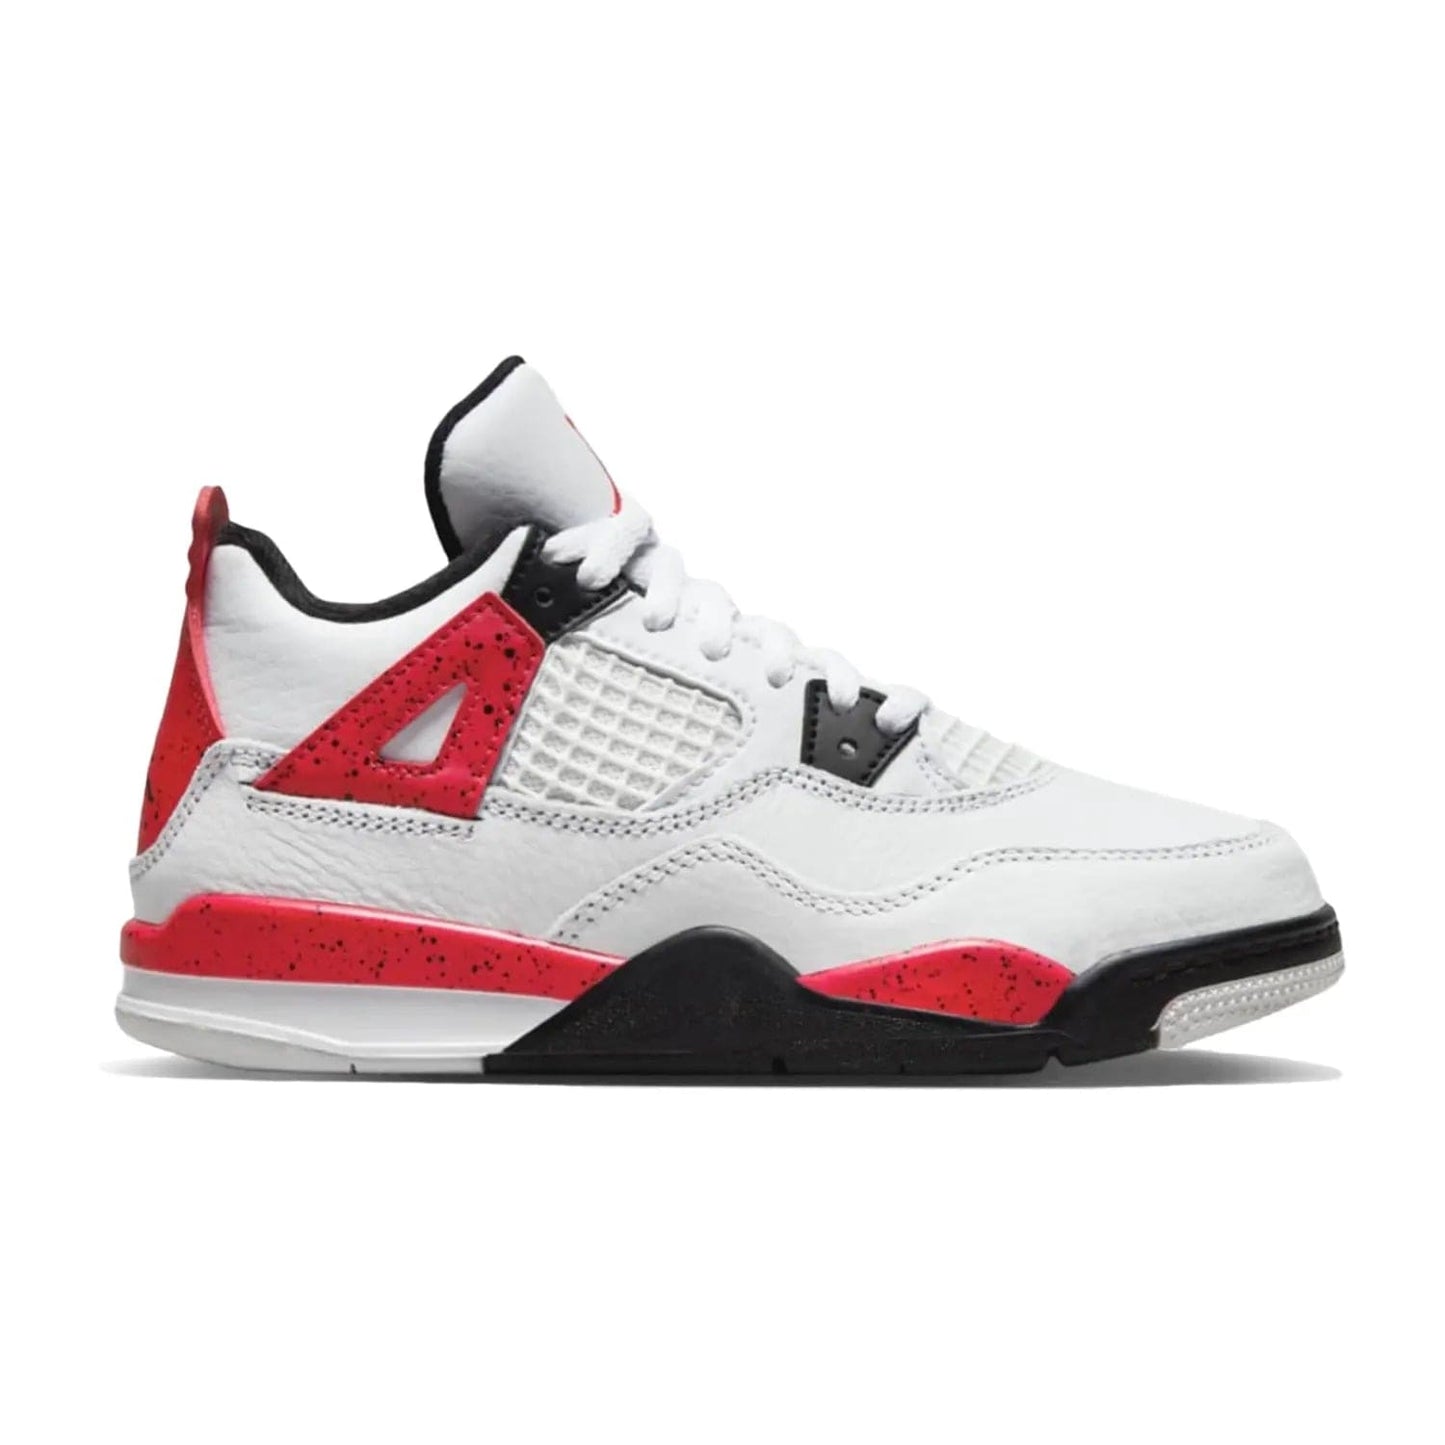 Jordan 4 Retro Red Cement (PS) - Image 1 - Only at www.BallersClubKickz.com - The Jordan 4 Retro Red Cement features a bold red cement upper, traditional lacing system, and textured rubber sole for comfort and traction. Turn heads with this unique colorway and iconic Jordan style.